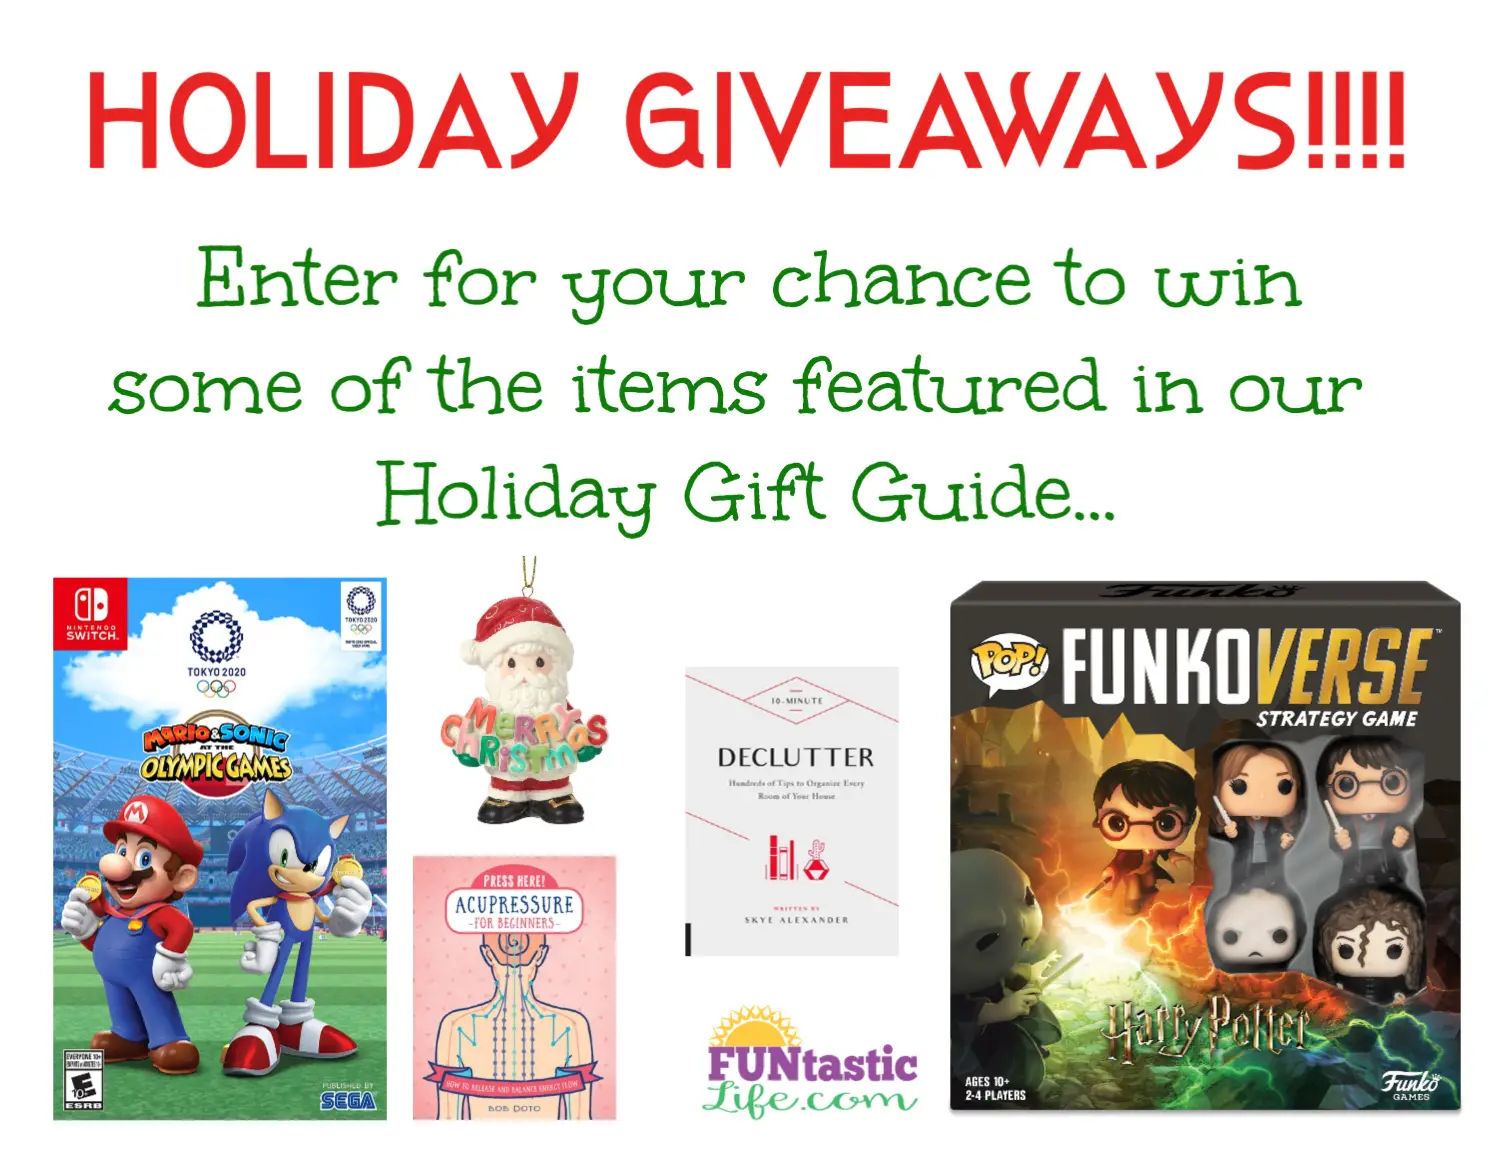 Enter for your chance to win some of the items featured in Funtastic Life's Holiday Gift Guide: Mario and Sonic at the Olympic Games Tokyo 2020 Nintendo Switch Code, Harry Potter Funkoverse Strategy Game, Precious Moments 11th Annual Santa Series Ornament, 10-Minute Declutter Book and a Press Here! Acupressure Book.